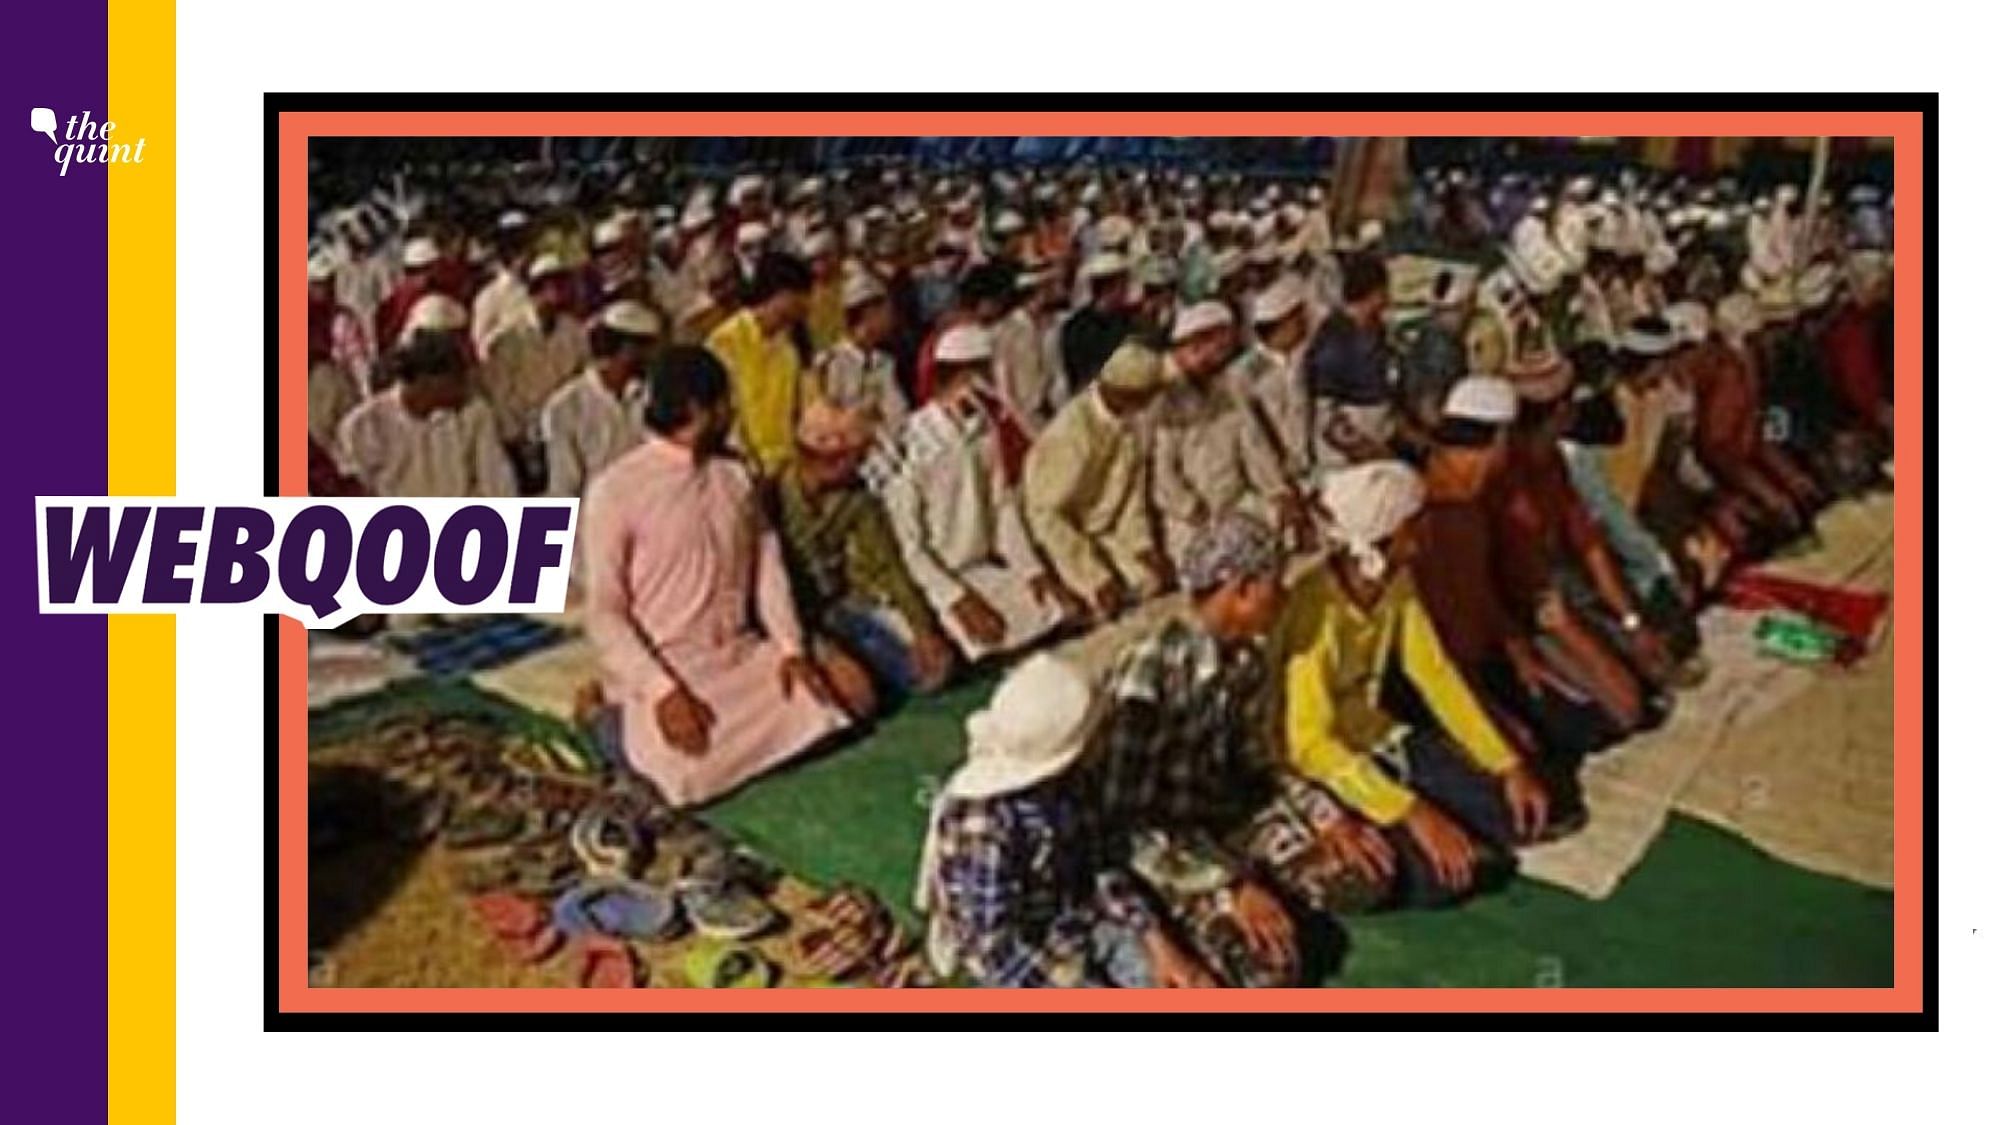 A 2018 image from Uttar Pradesh’s Allahabad was shared to propagate the false claim that several people offered namaz in Tamil Nadu’s Vellore amid the ongoing coronavirus lockdown.